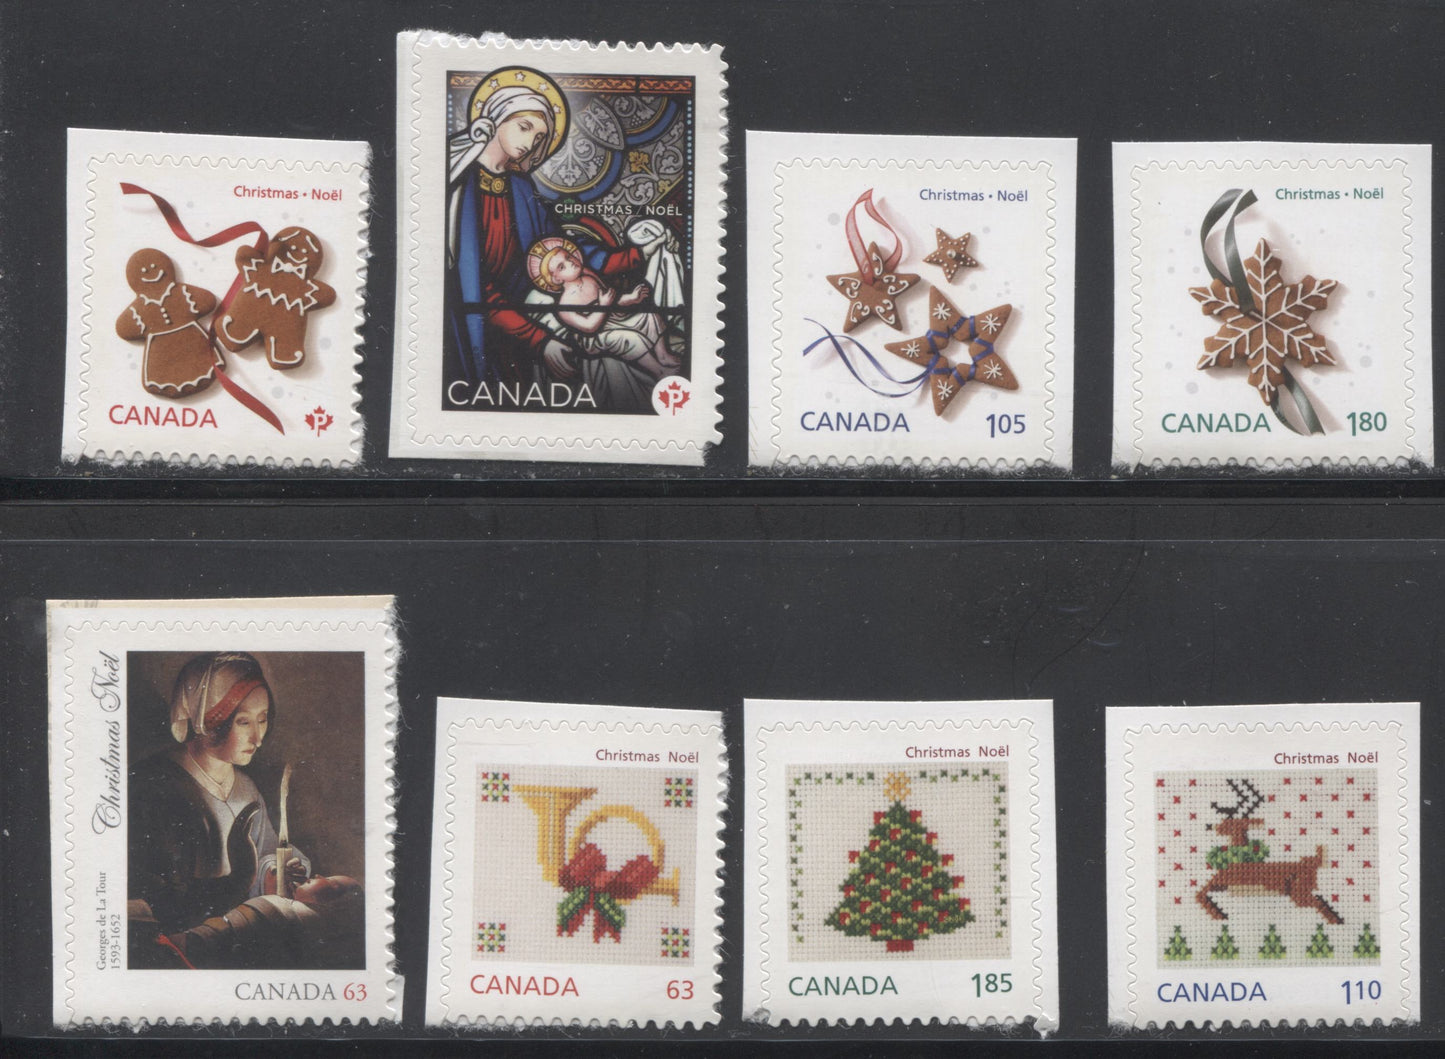 Lot 241 Canada #2582-2585, 2688-2691 2012-2013 Christmas Issues, VFNH Complete Sets of the Booklet Stamps